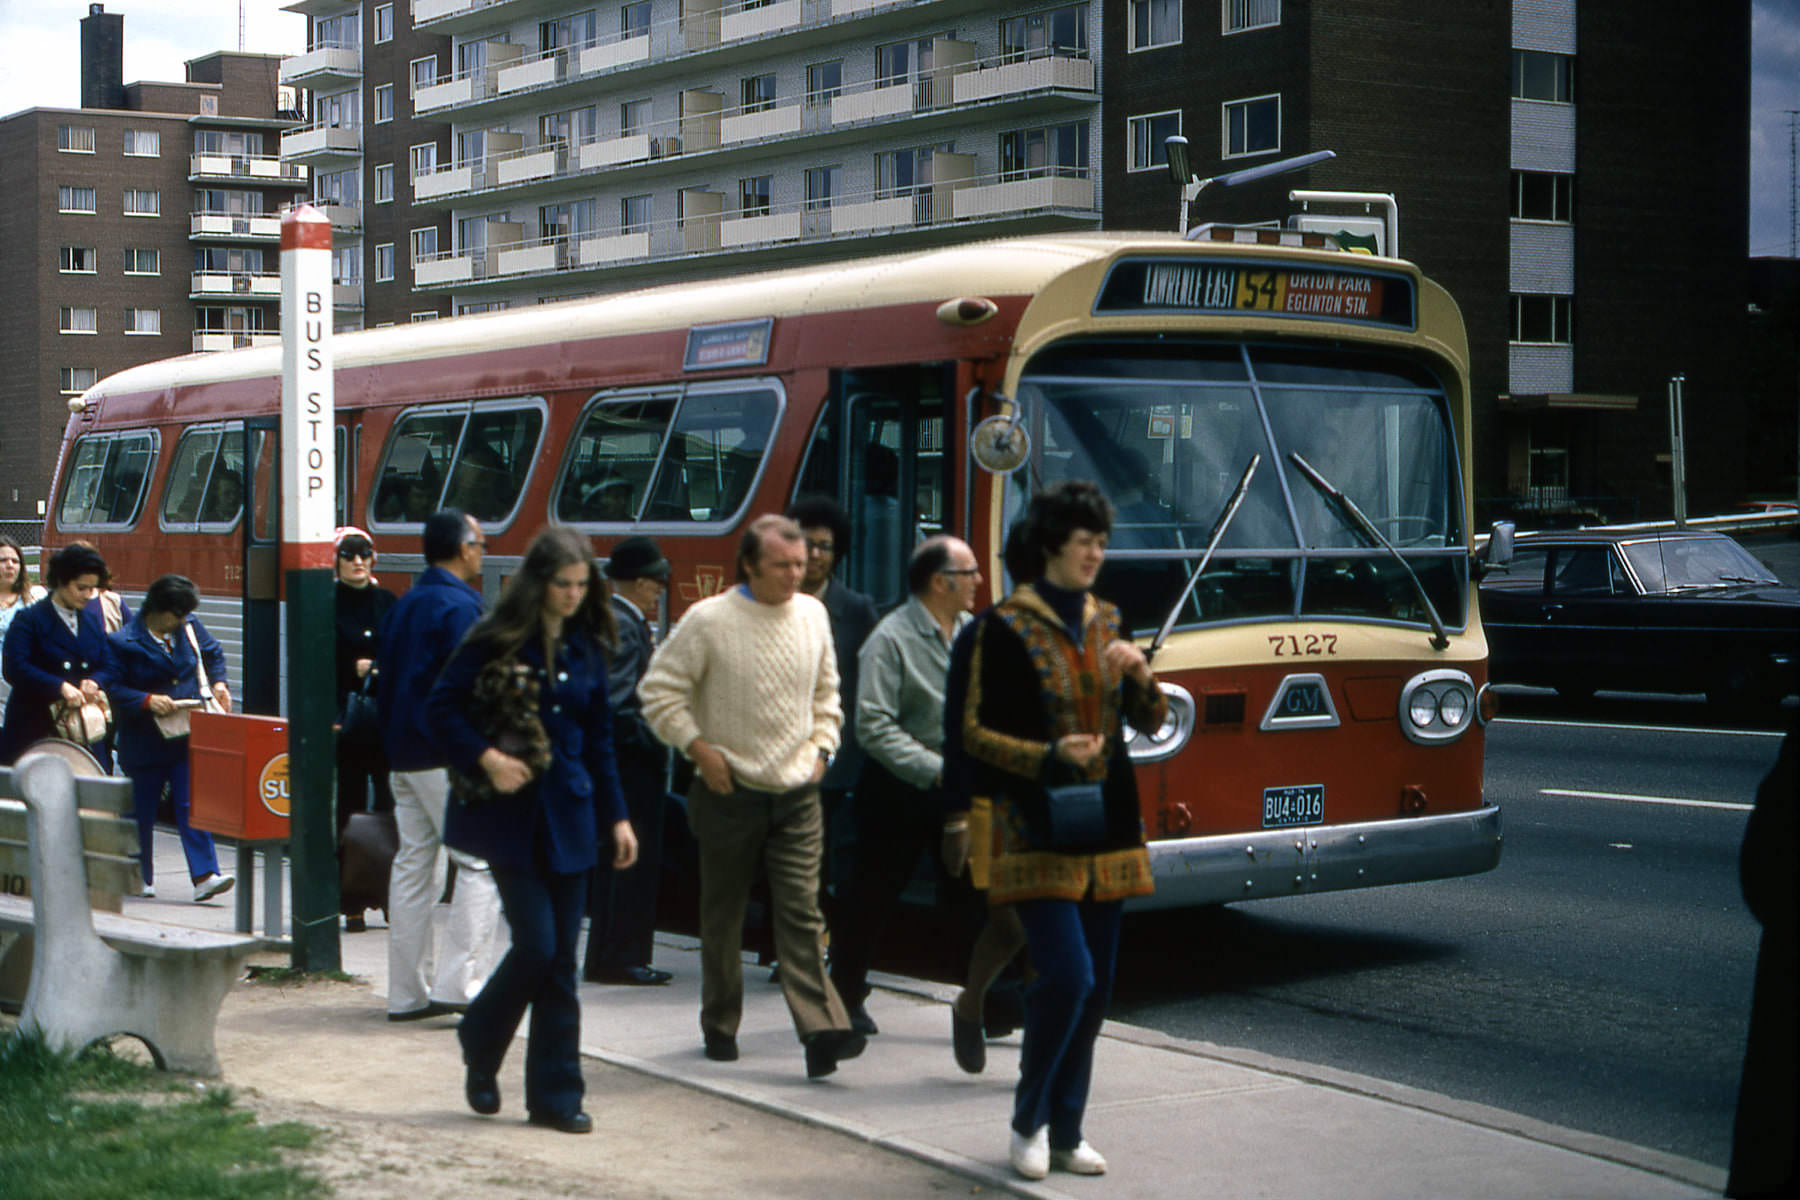 Lawrence Avenue East & Don Mills Road, 1973